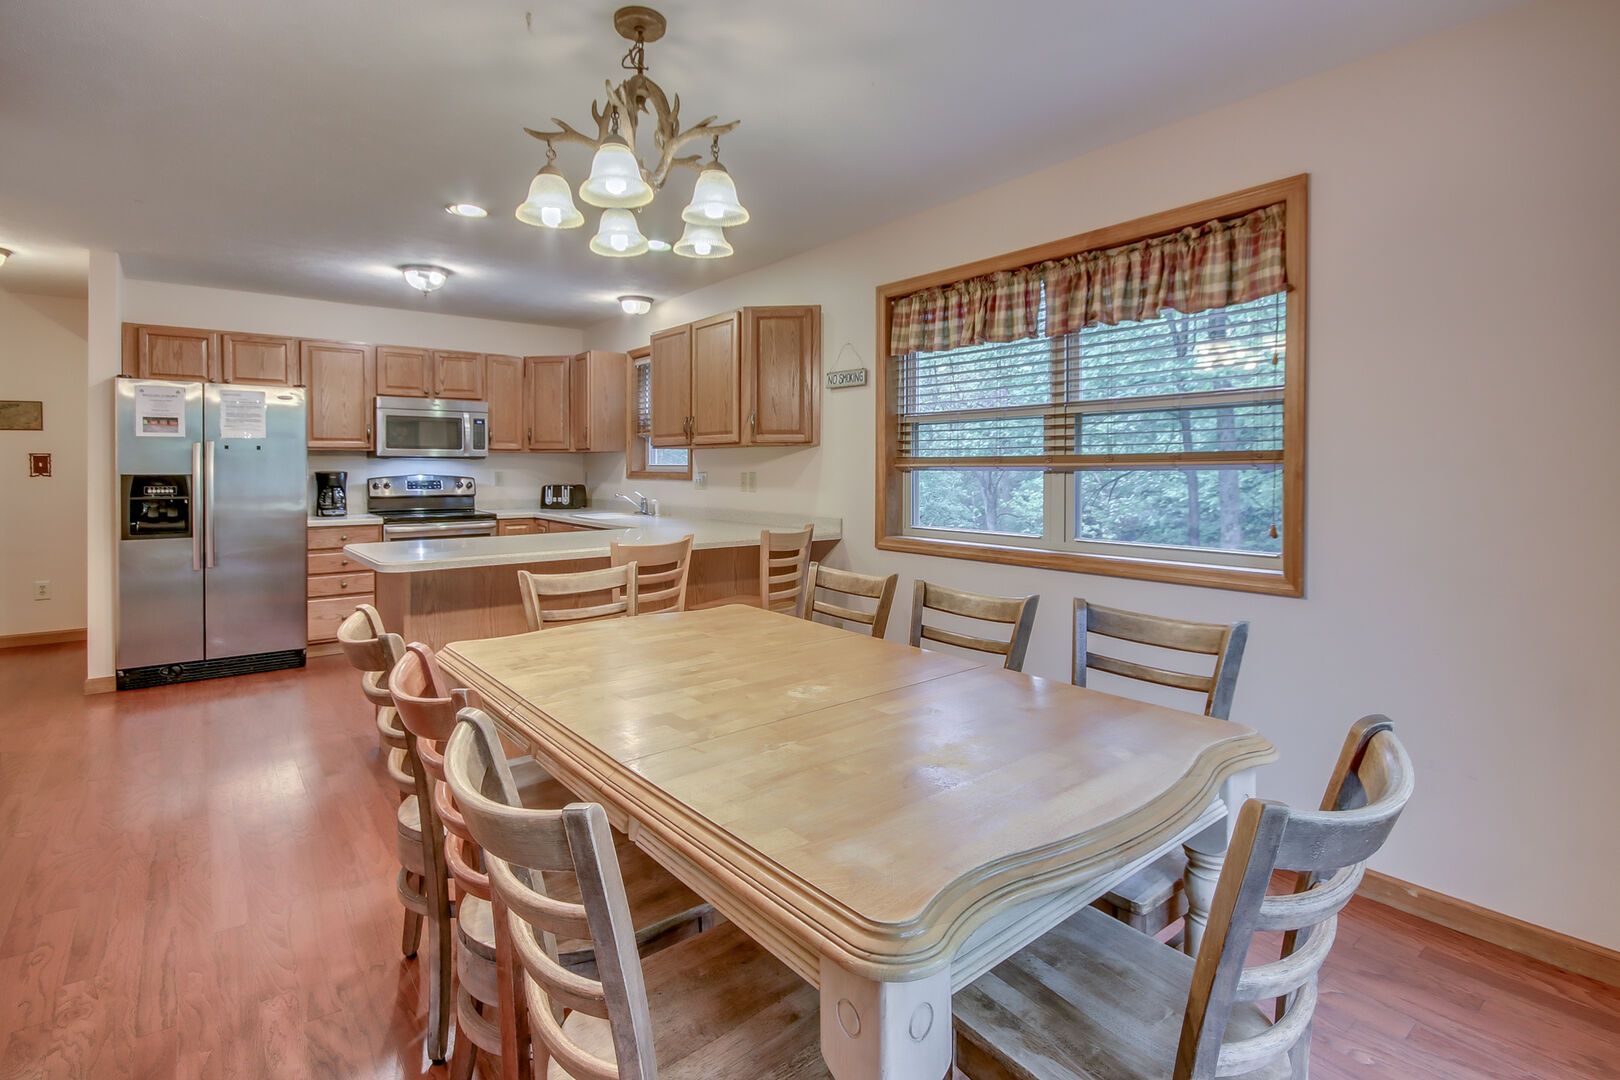 A Kitchen Table with Seven Chairs in Our Vacation Rental in the Poconos by Lake.